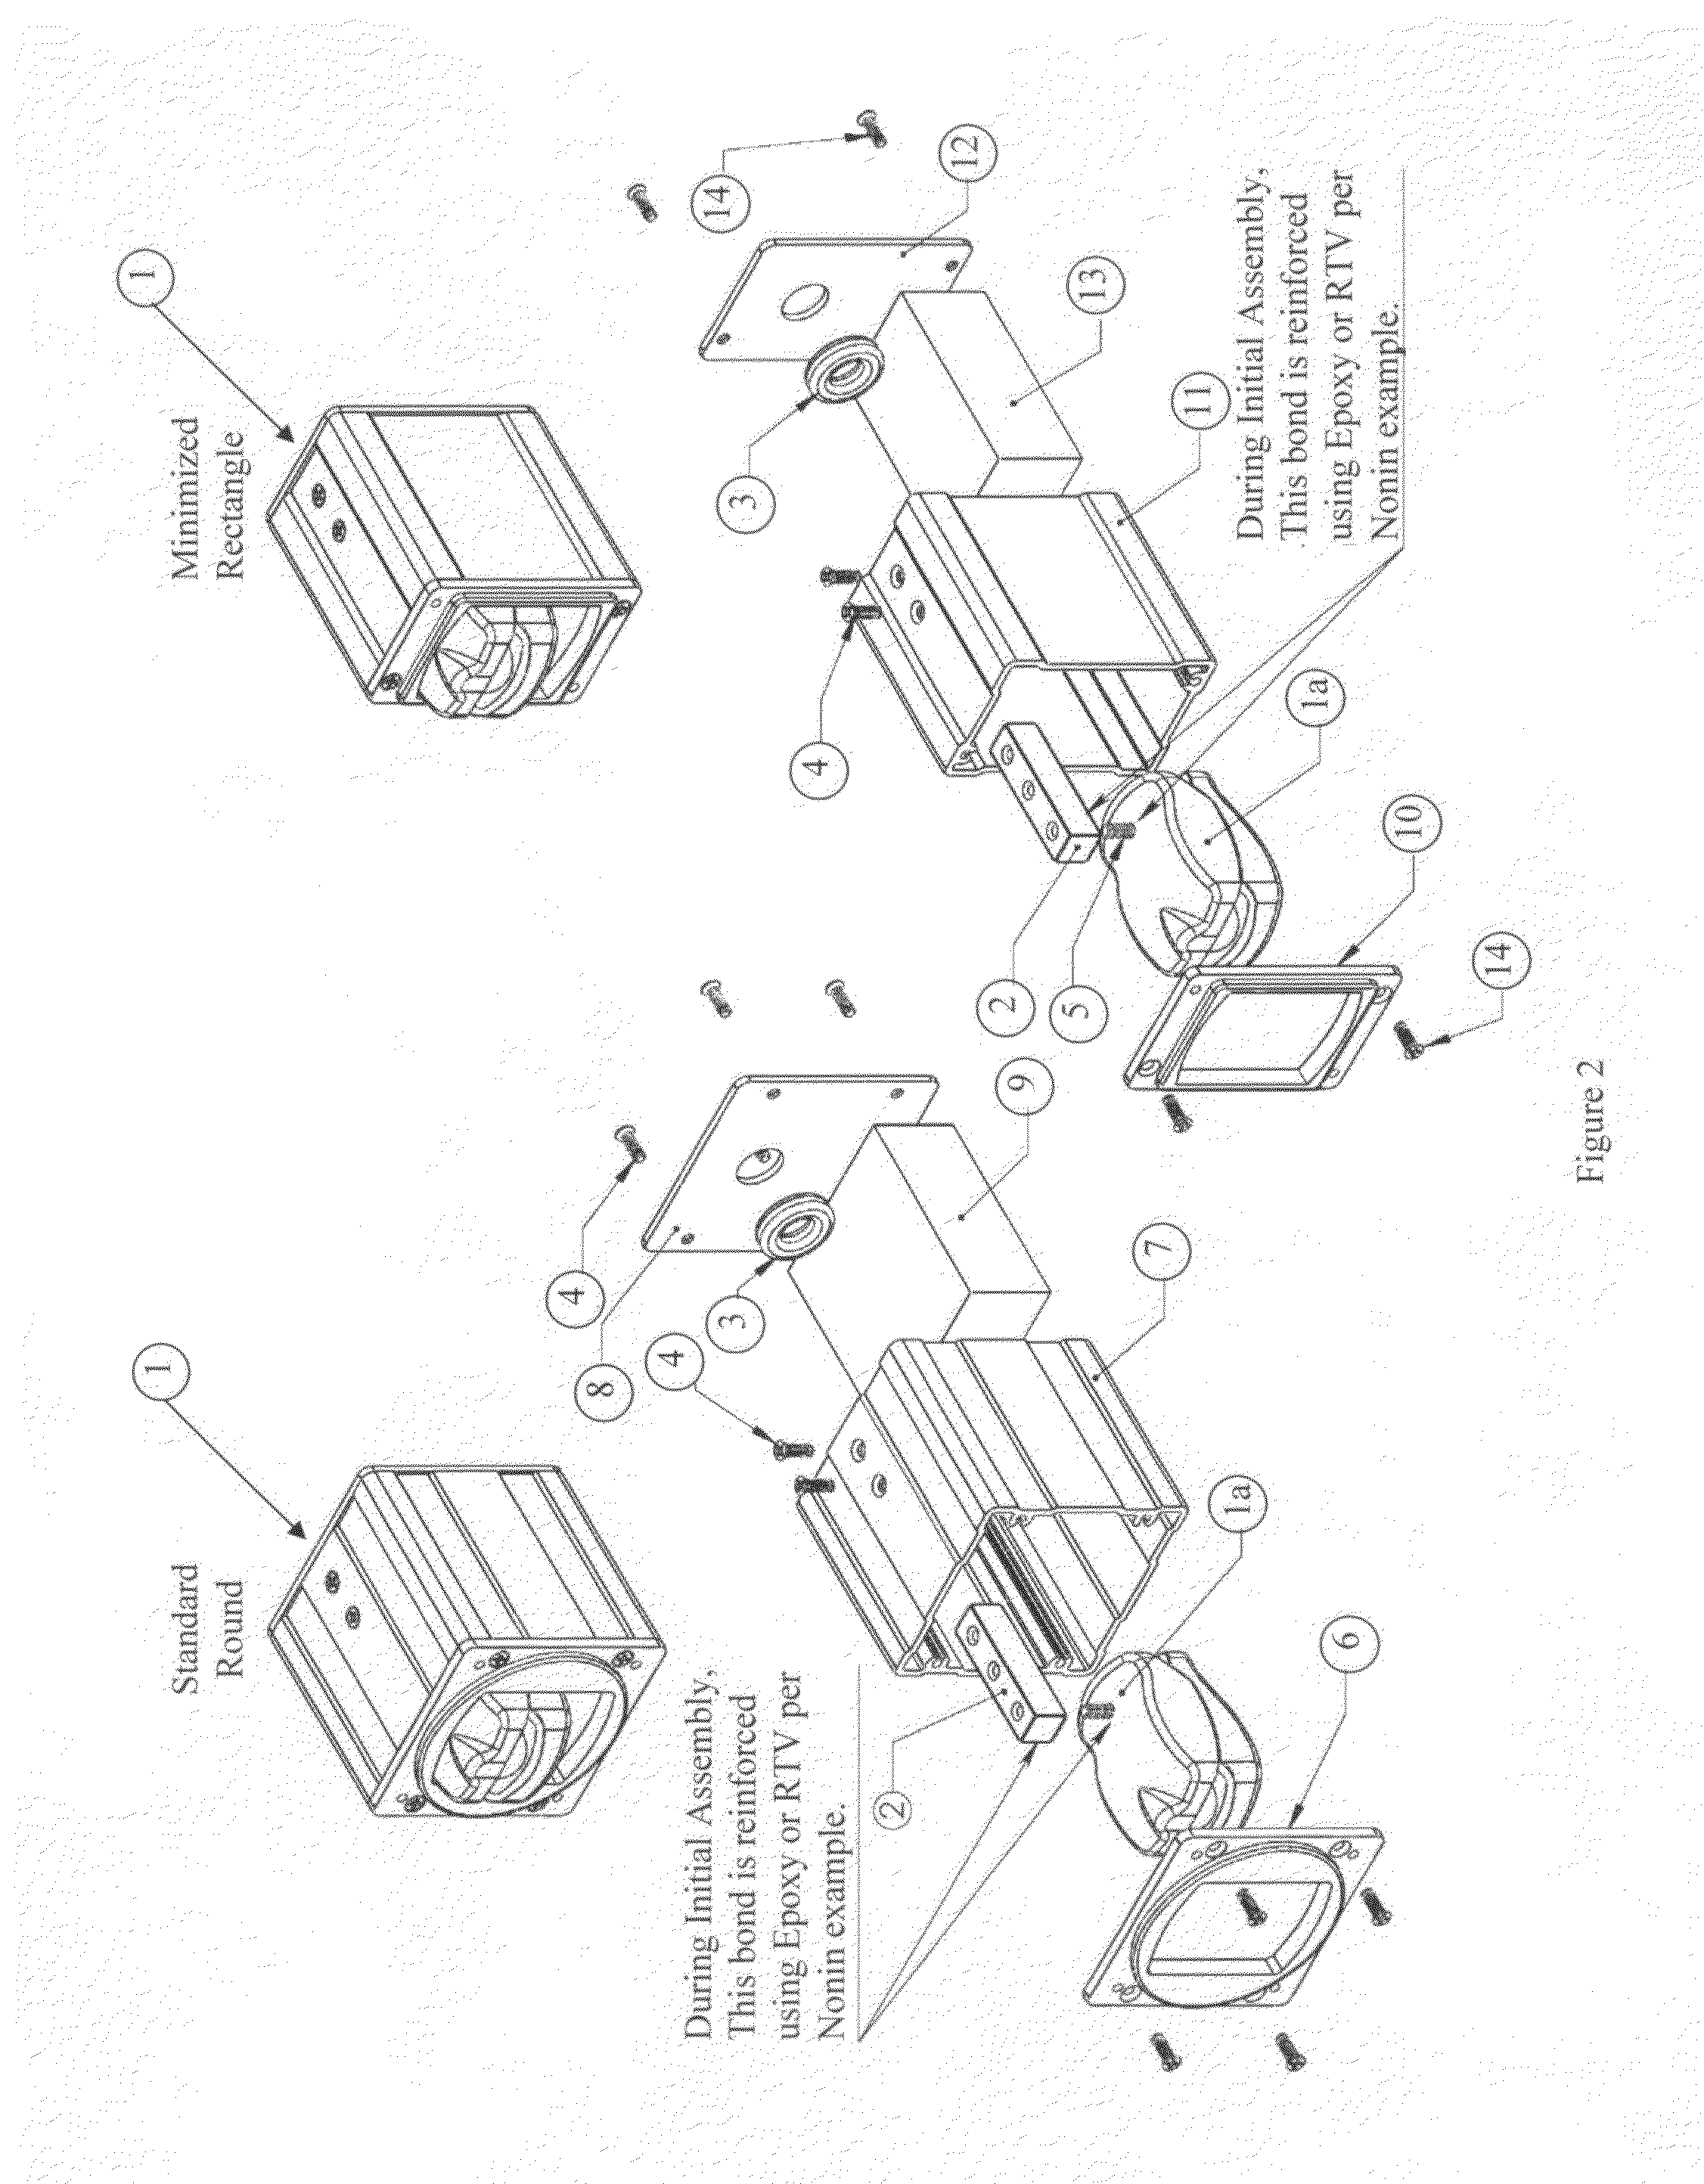 Aviation physiological health monitoring system and method